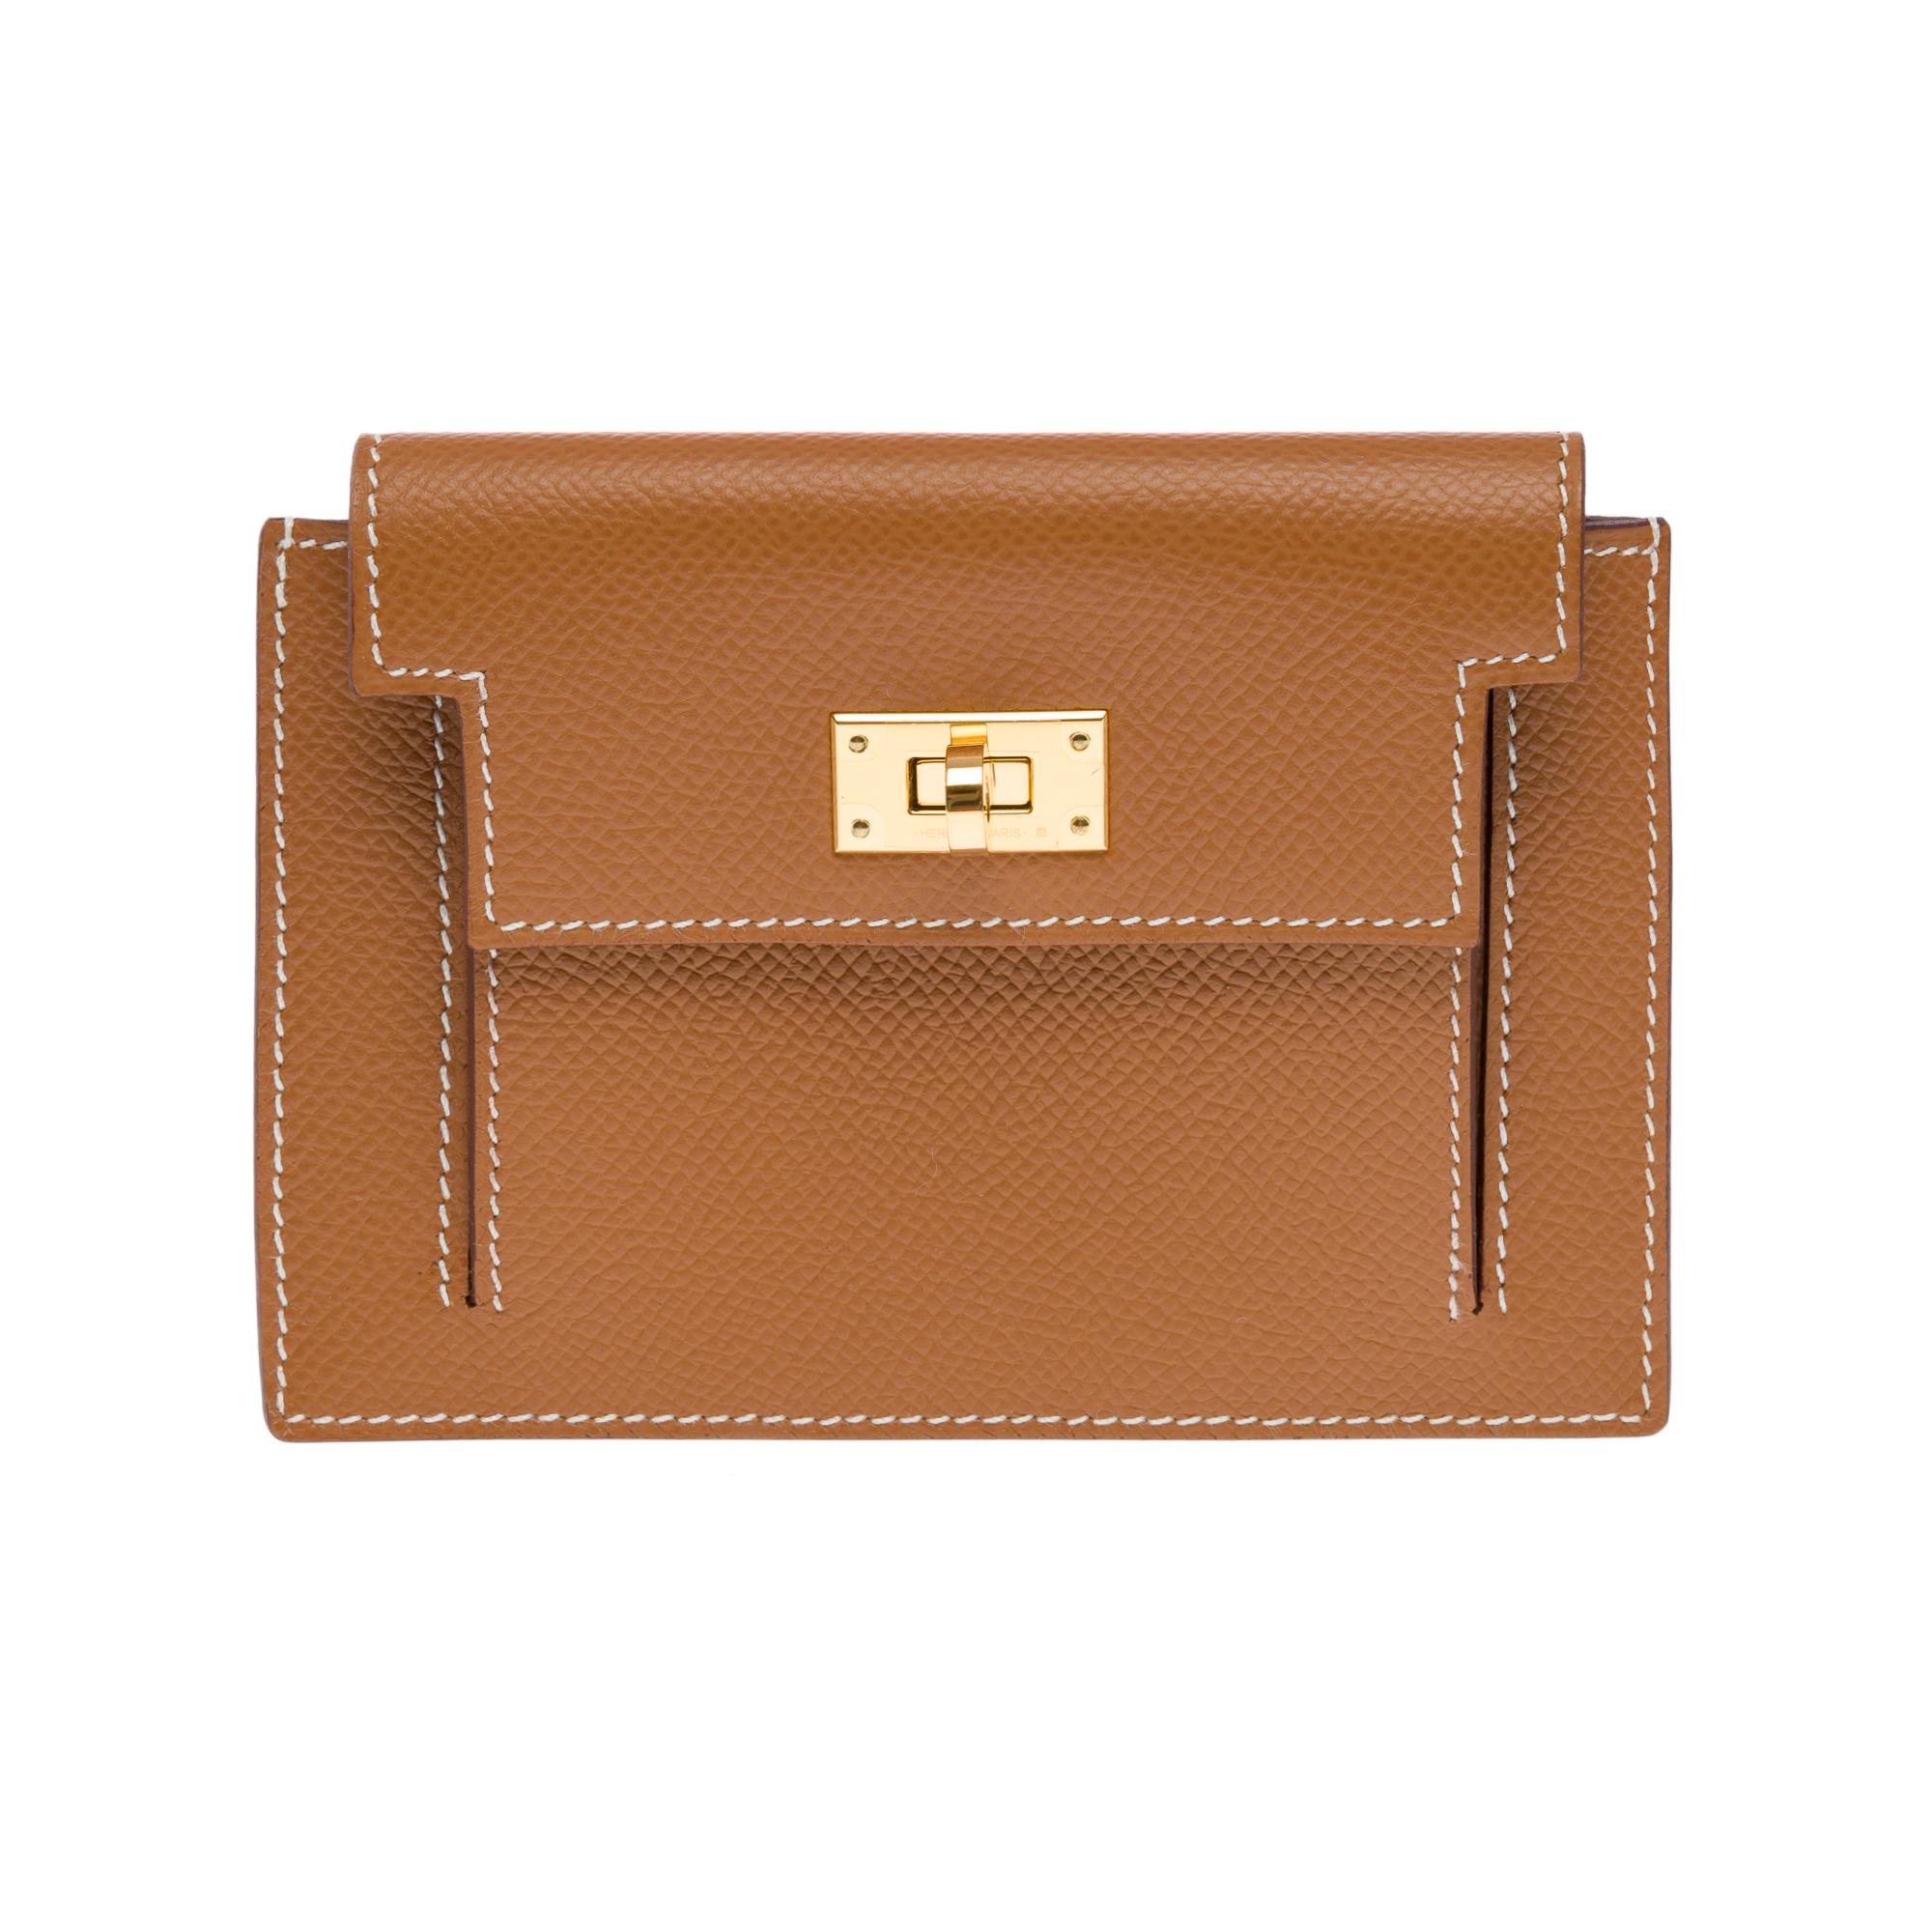 Women's or Men's Beautiful New Hermès Kelly Pocket Compact in Gold Epsom calf leather , GHW For Sale